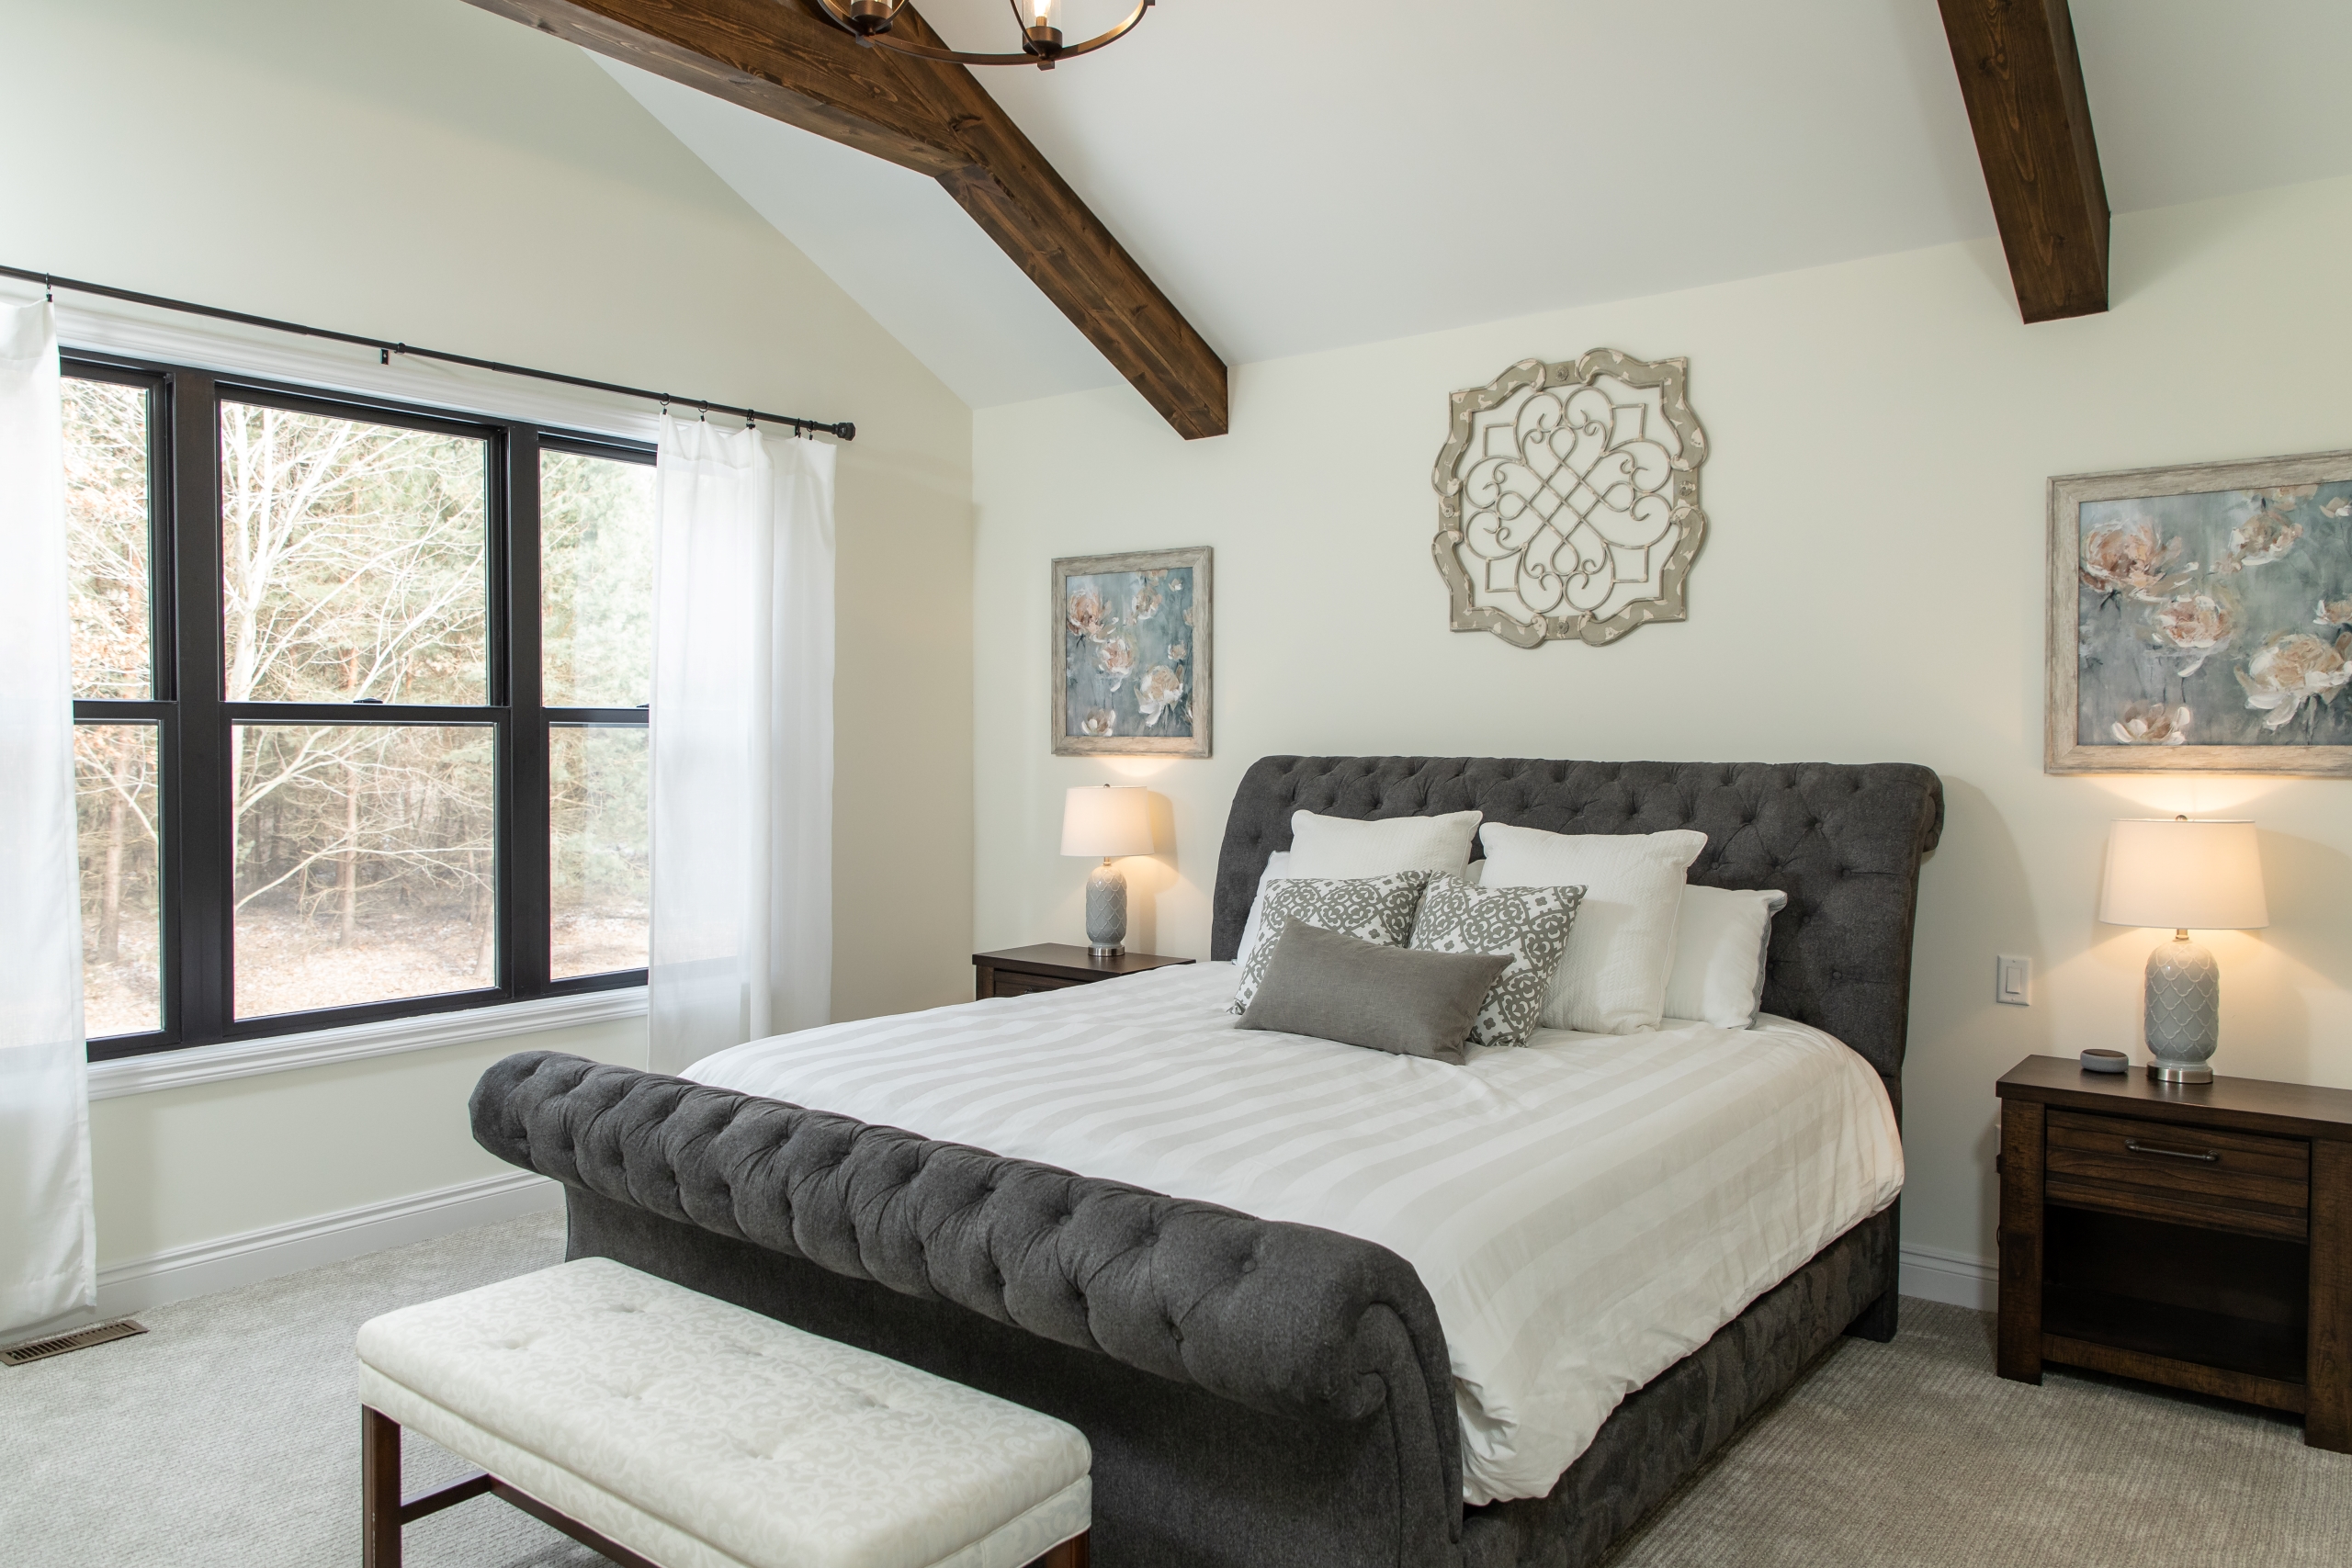 Woodline Building Company Project: Modern Rustic Ranch Master Bedroom